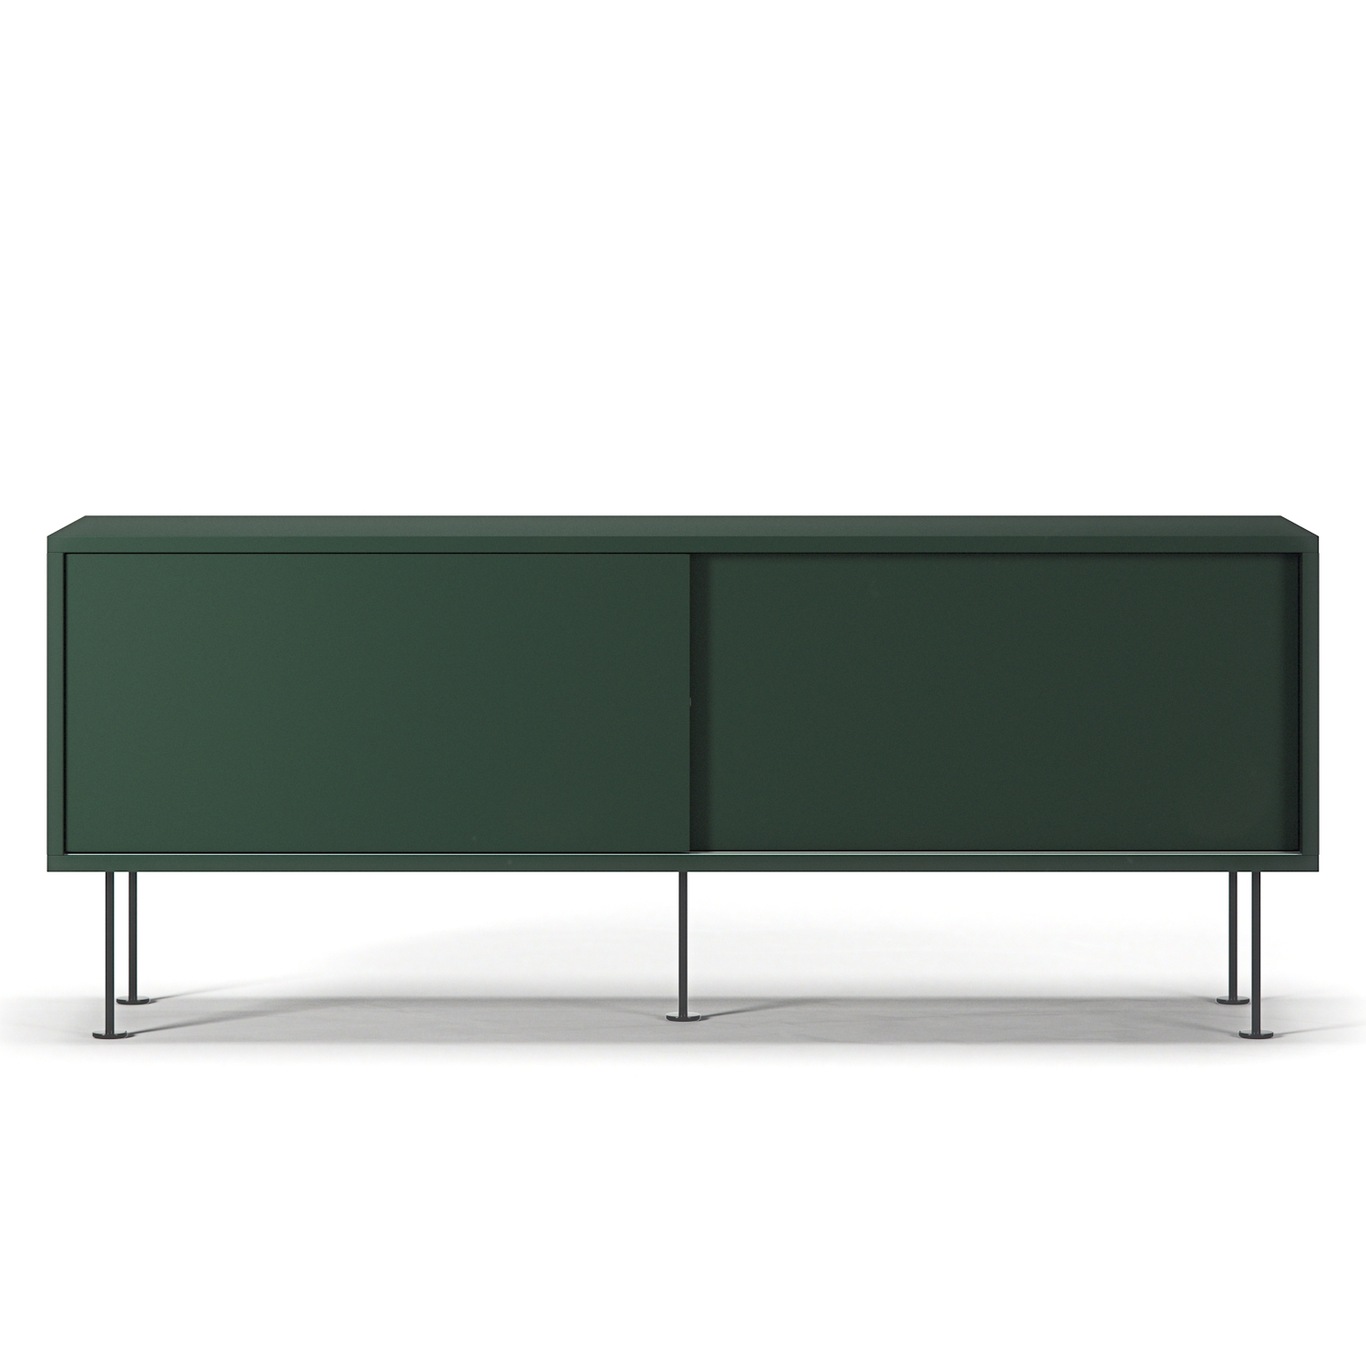 Vogue Media Bench With Legs 136 cm, Green / Black